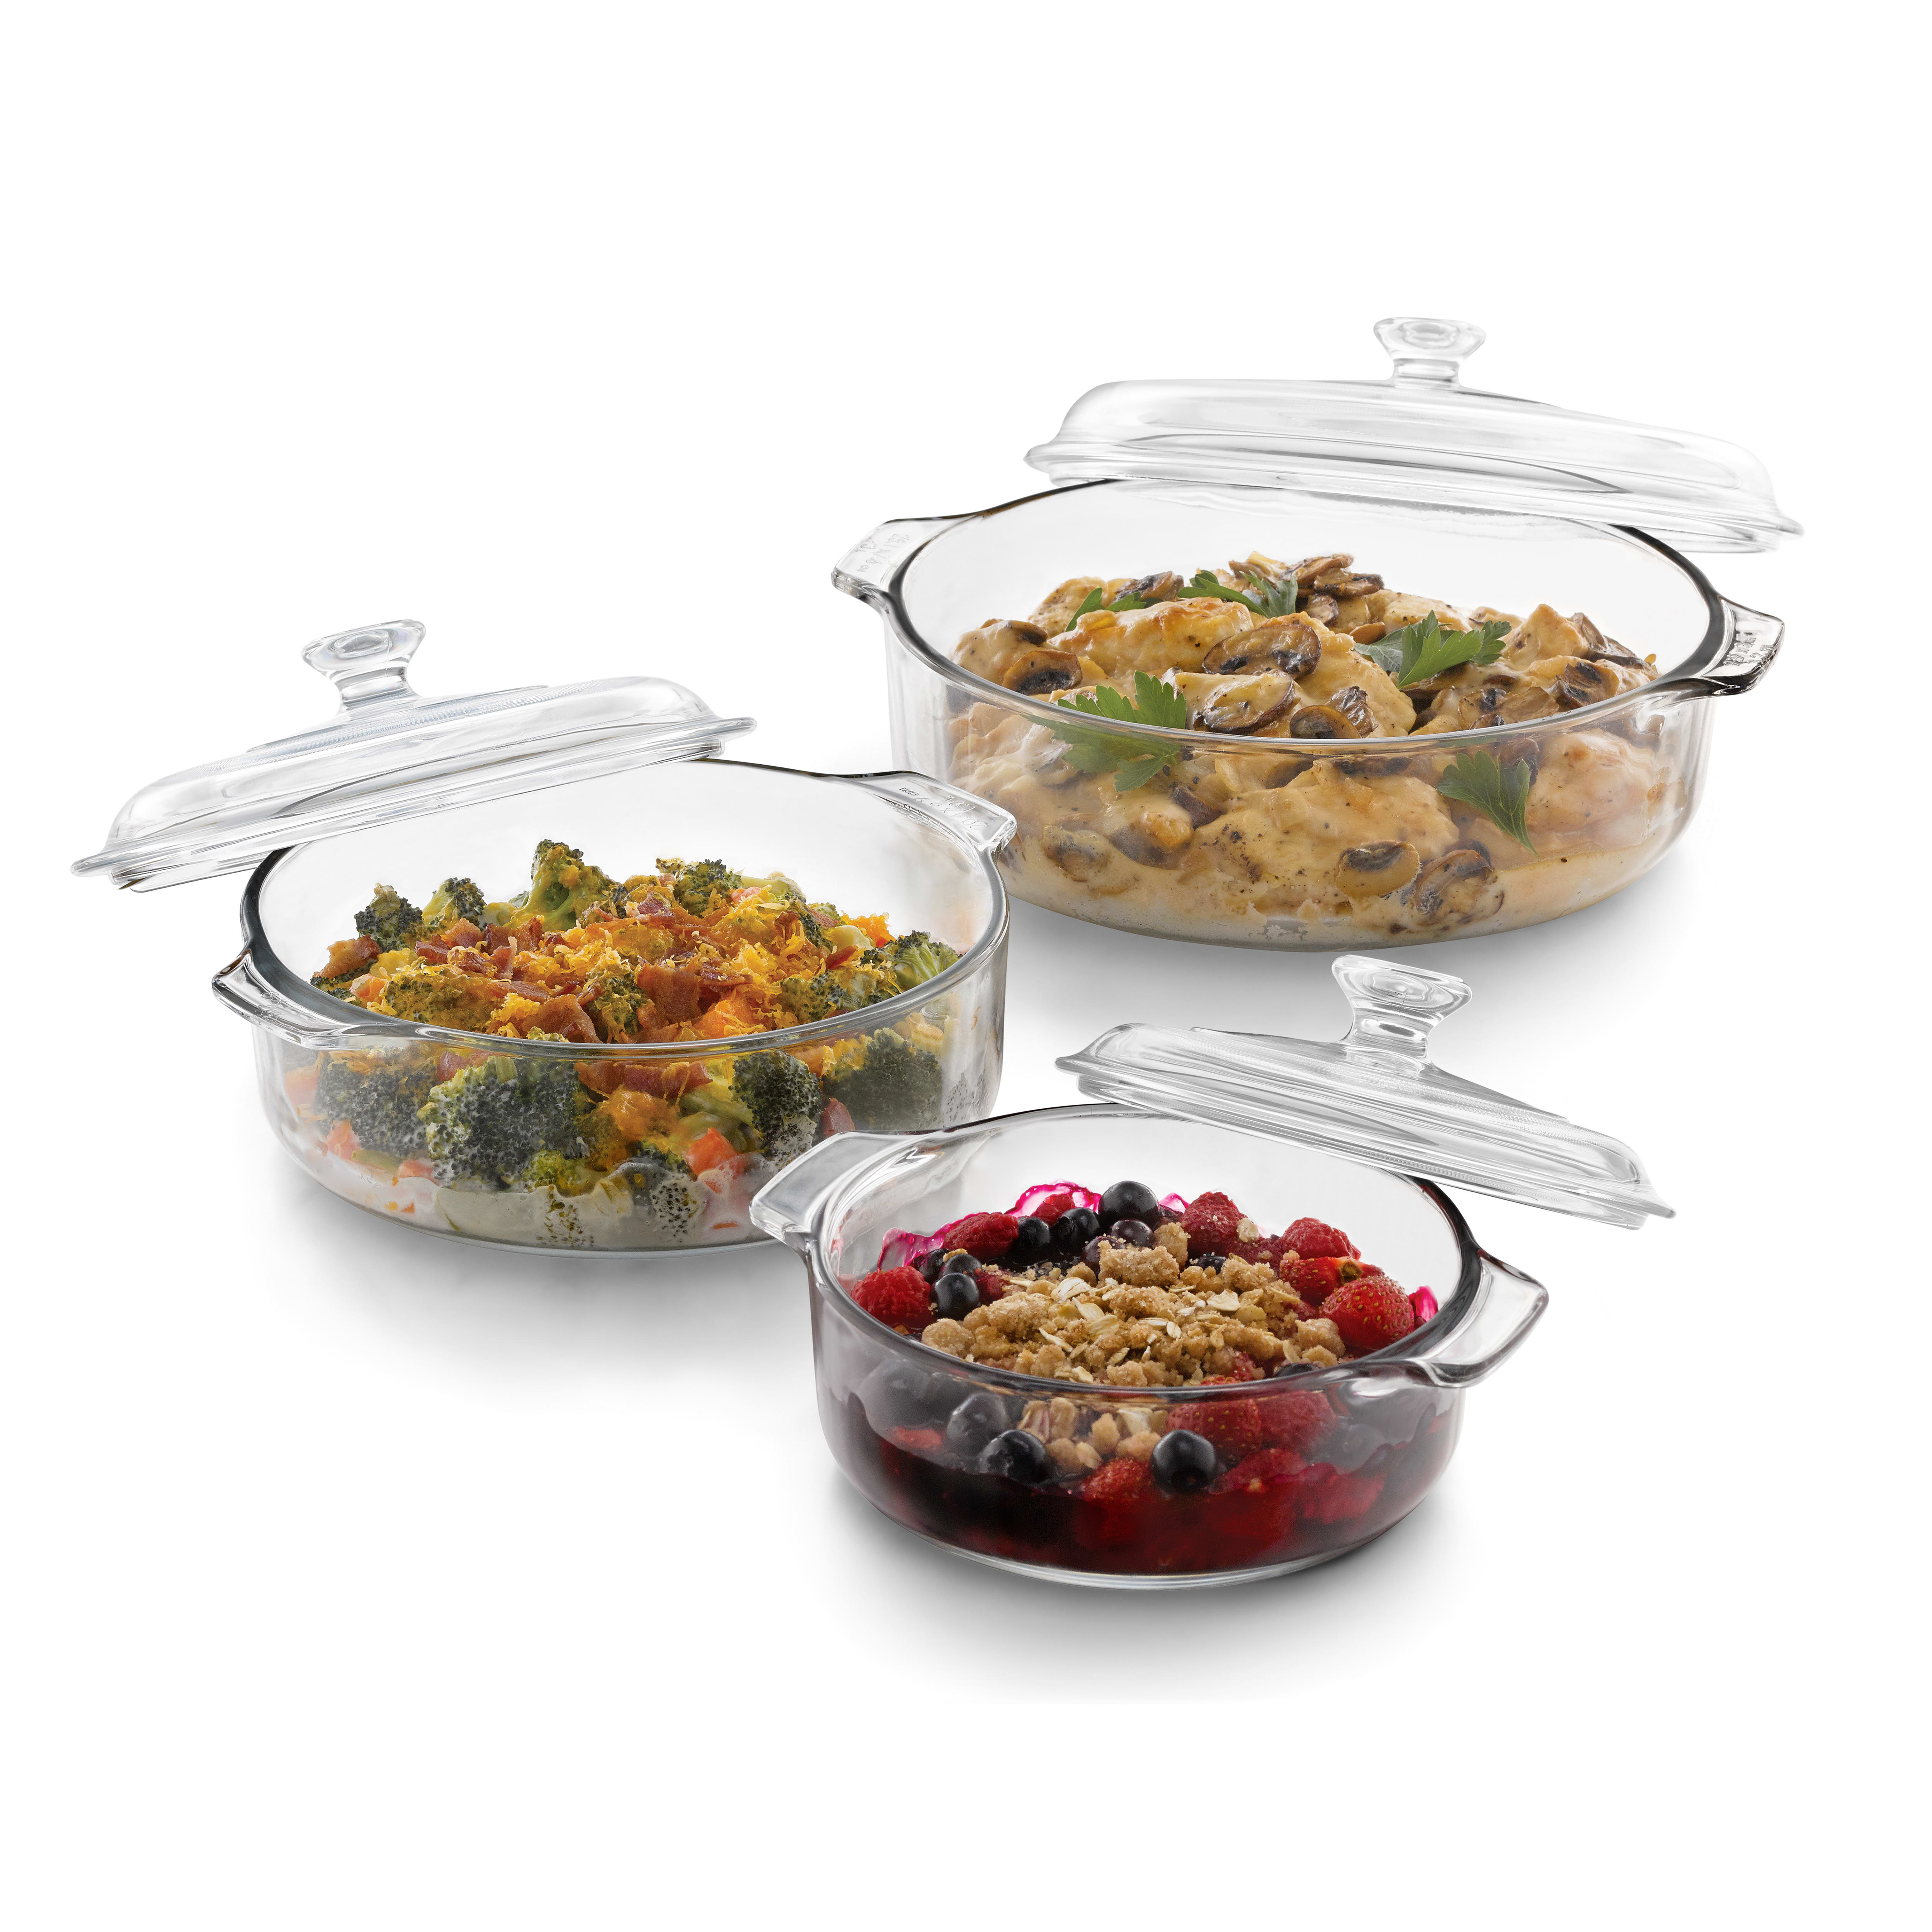 Libbey Baker's Basics 3-Piece Glass Casserole Baking Dish Set with Glass Covers - image 1 of 5